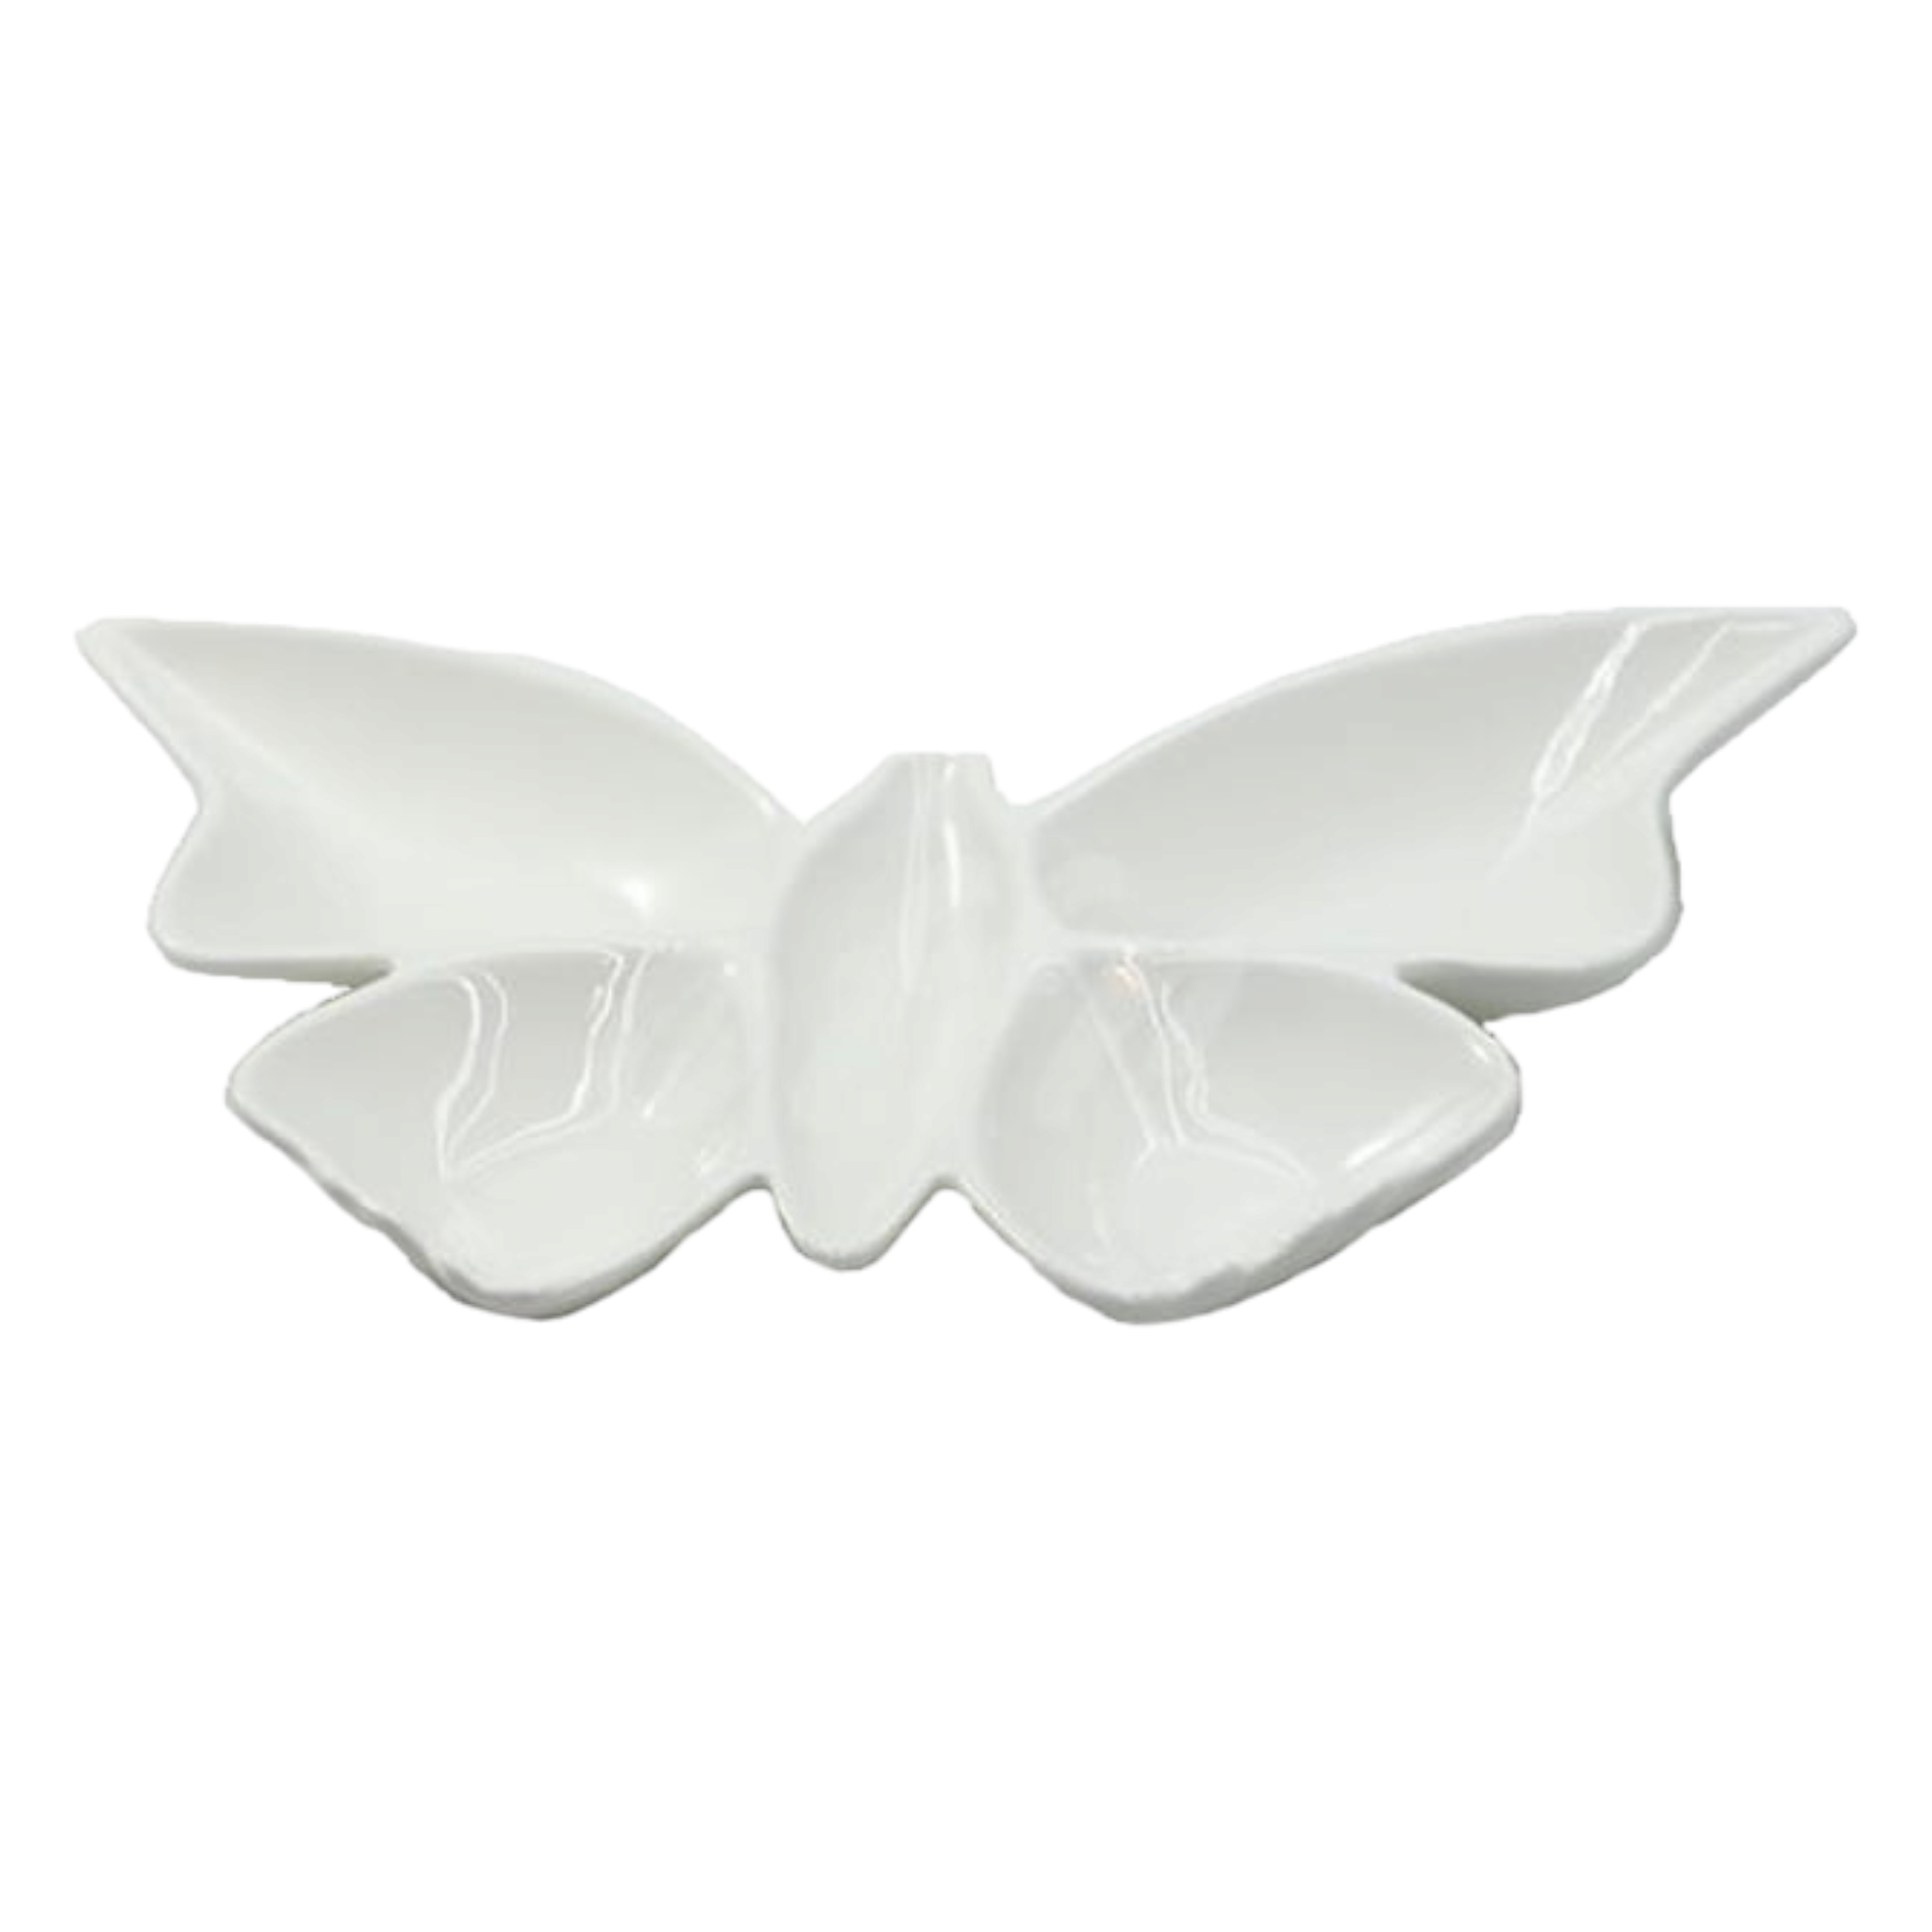 Ceramic White Butterfly Condiments Serving Plate 12Inch